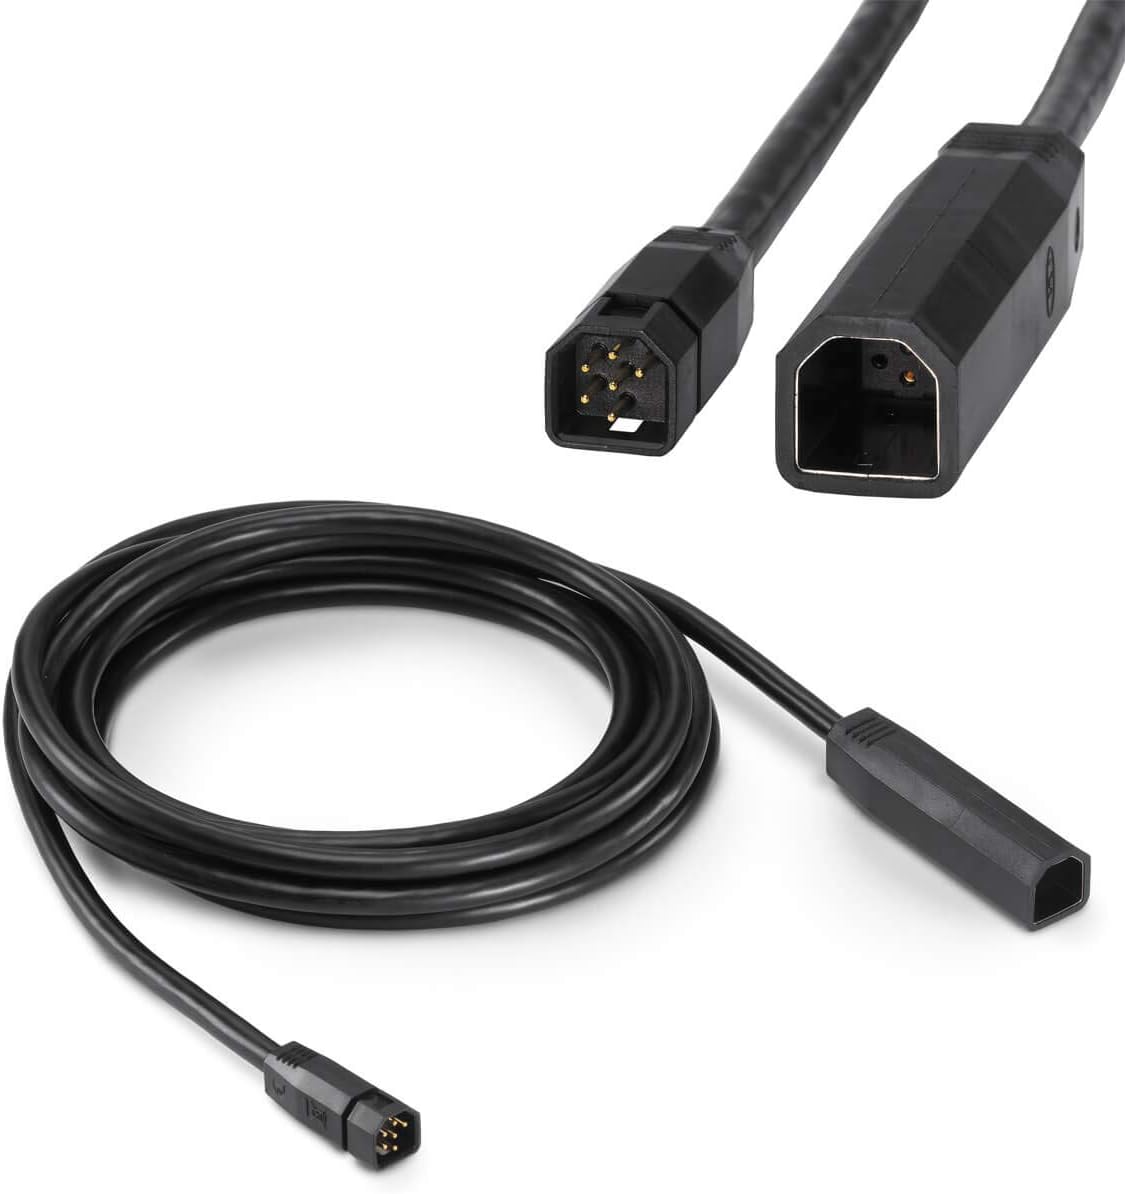 Humminbird Transducer Extension Cable Review